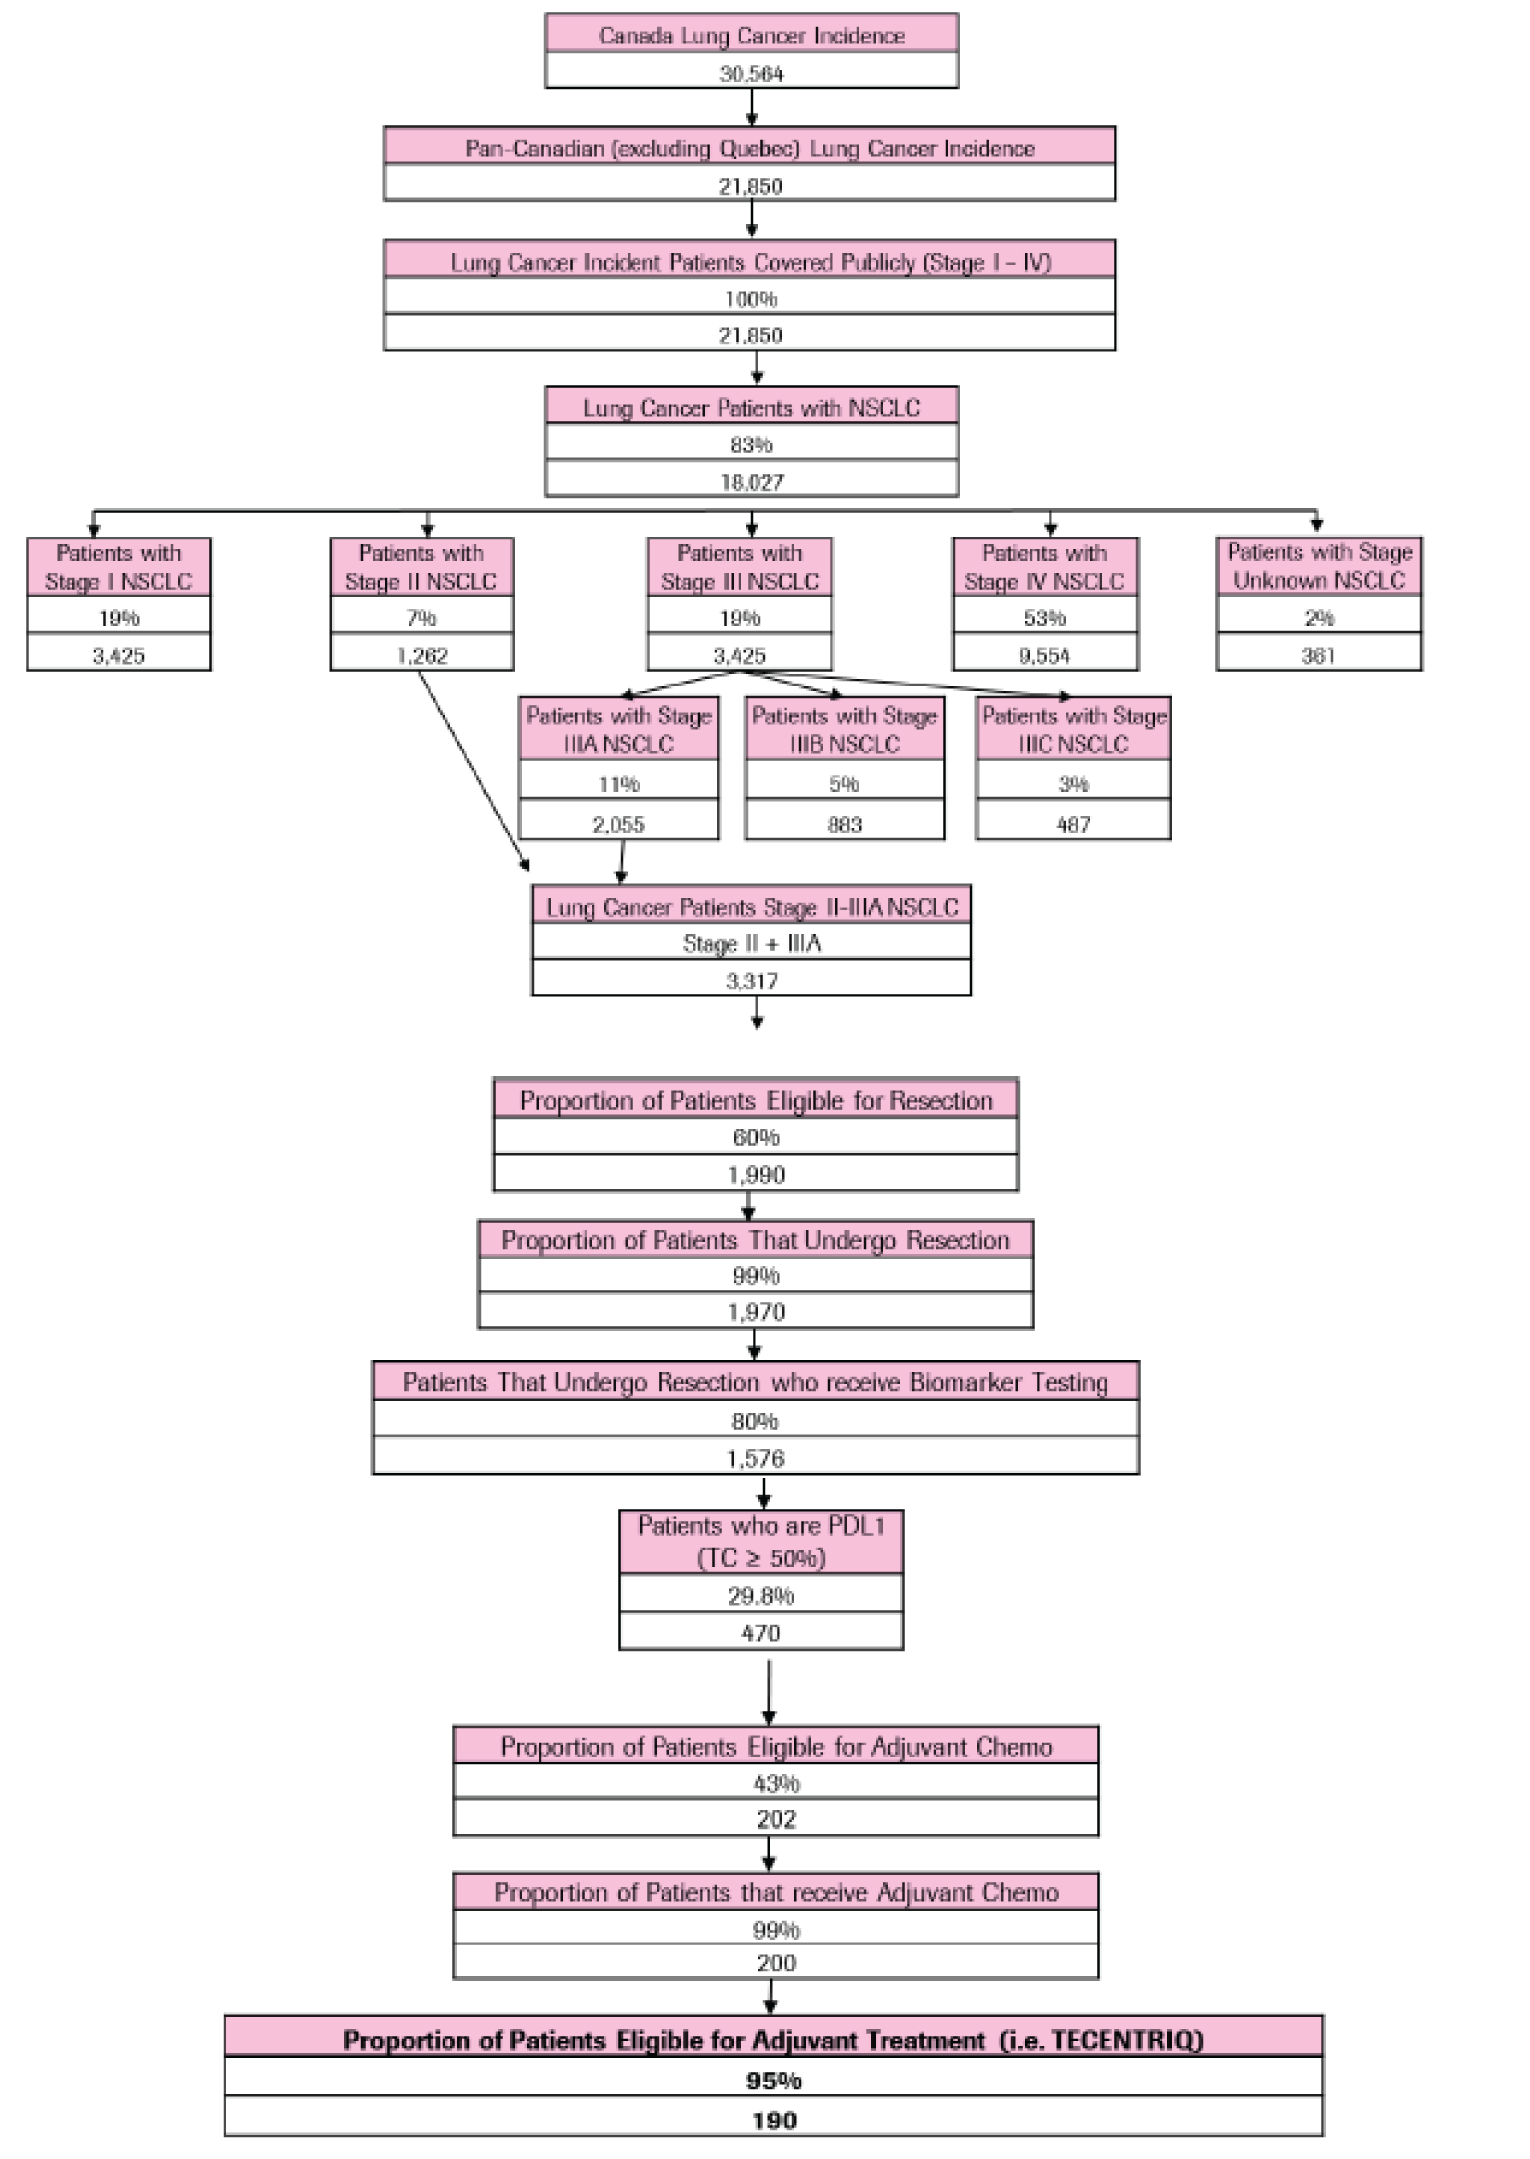 A flow diagram depicting how the sponsor determined their estimate of the eligible population size for the Health Canada indication, starting with lung cancer incidence and applying various epidemiological estimates and assumptions to derive the eligible patient population. Steps include determining the proportion of patients with NSCLC, the staging, proportion eligible for and undergoing resection, biomarker testing rates and incidence of PD-L1 TC greater than 50%, and receipt of adjuvant chemotherapy. All culminate in the proportion of patients eligible for treatment with atezolizumab for NSCLC in the adjuvant setting.